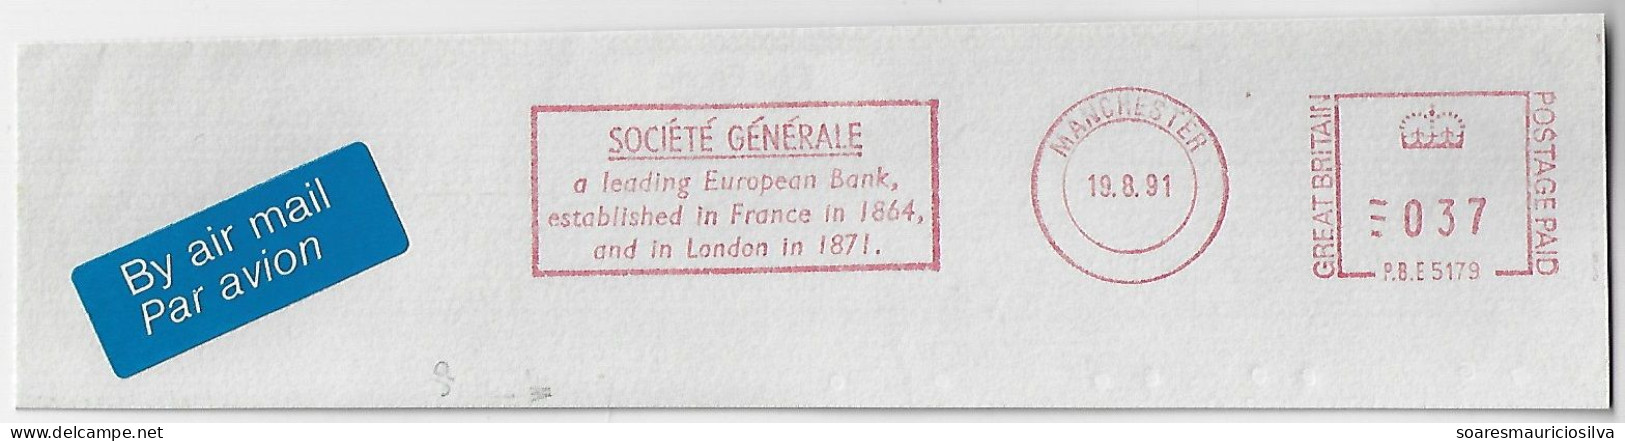 Great Britain 1991 Meter Stamp Pitney Bowes 5000 Series With Slogan By Société Générale Bank In Manchester - Briefe U. Dokumente